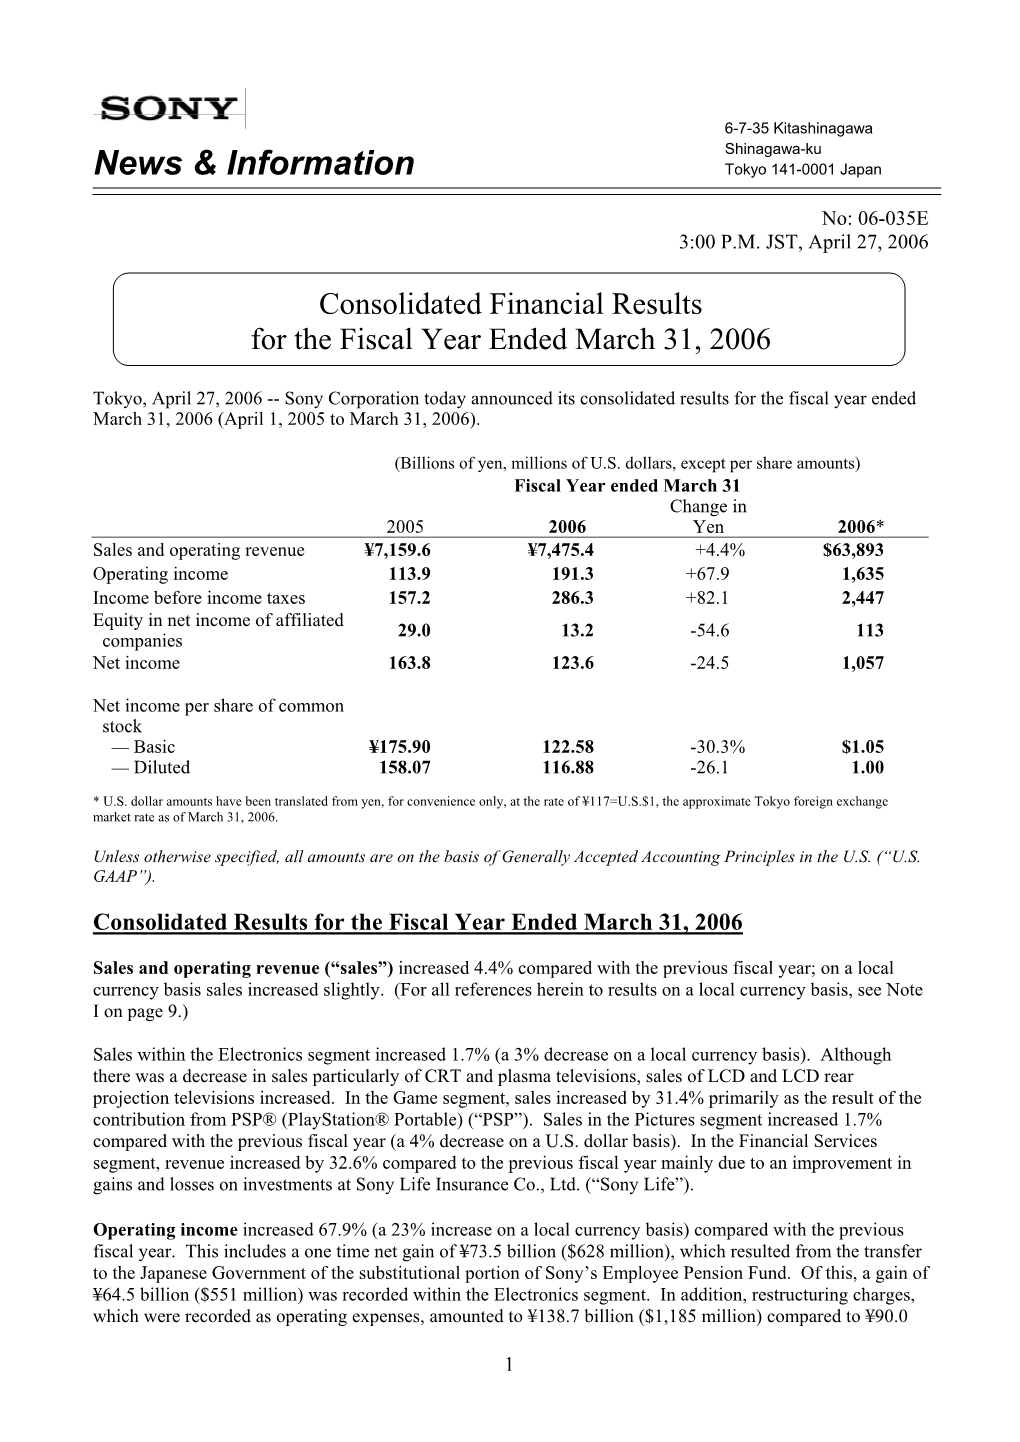 Consolidated Financial Results for the Fiscal Year Ended March 31, 2006